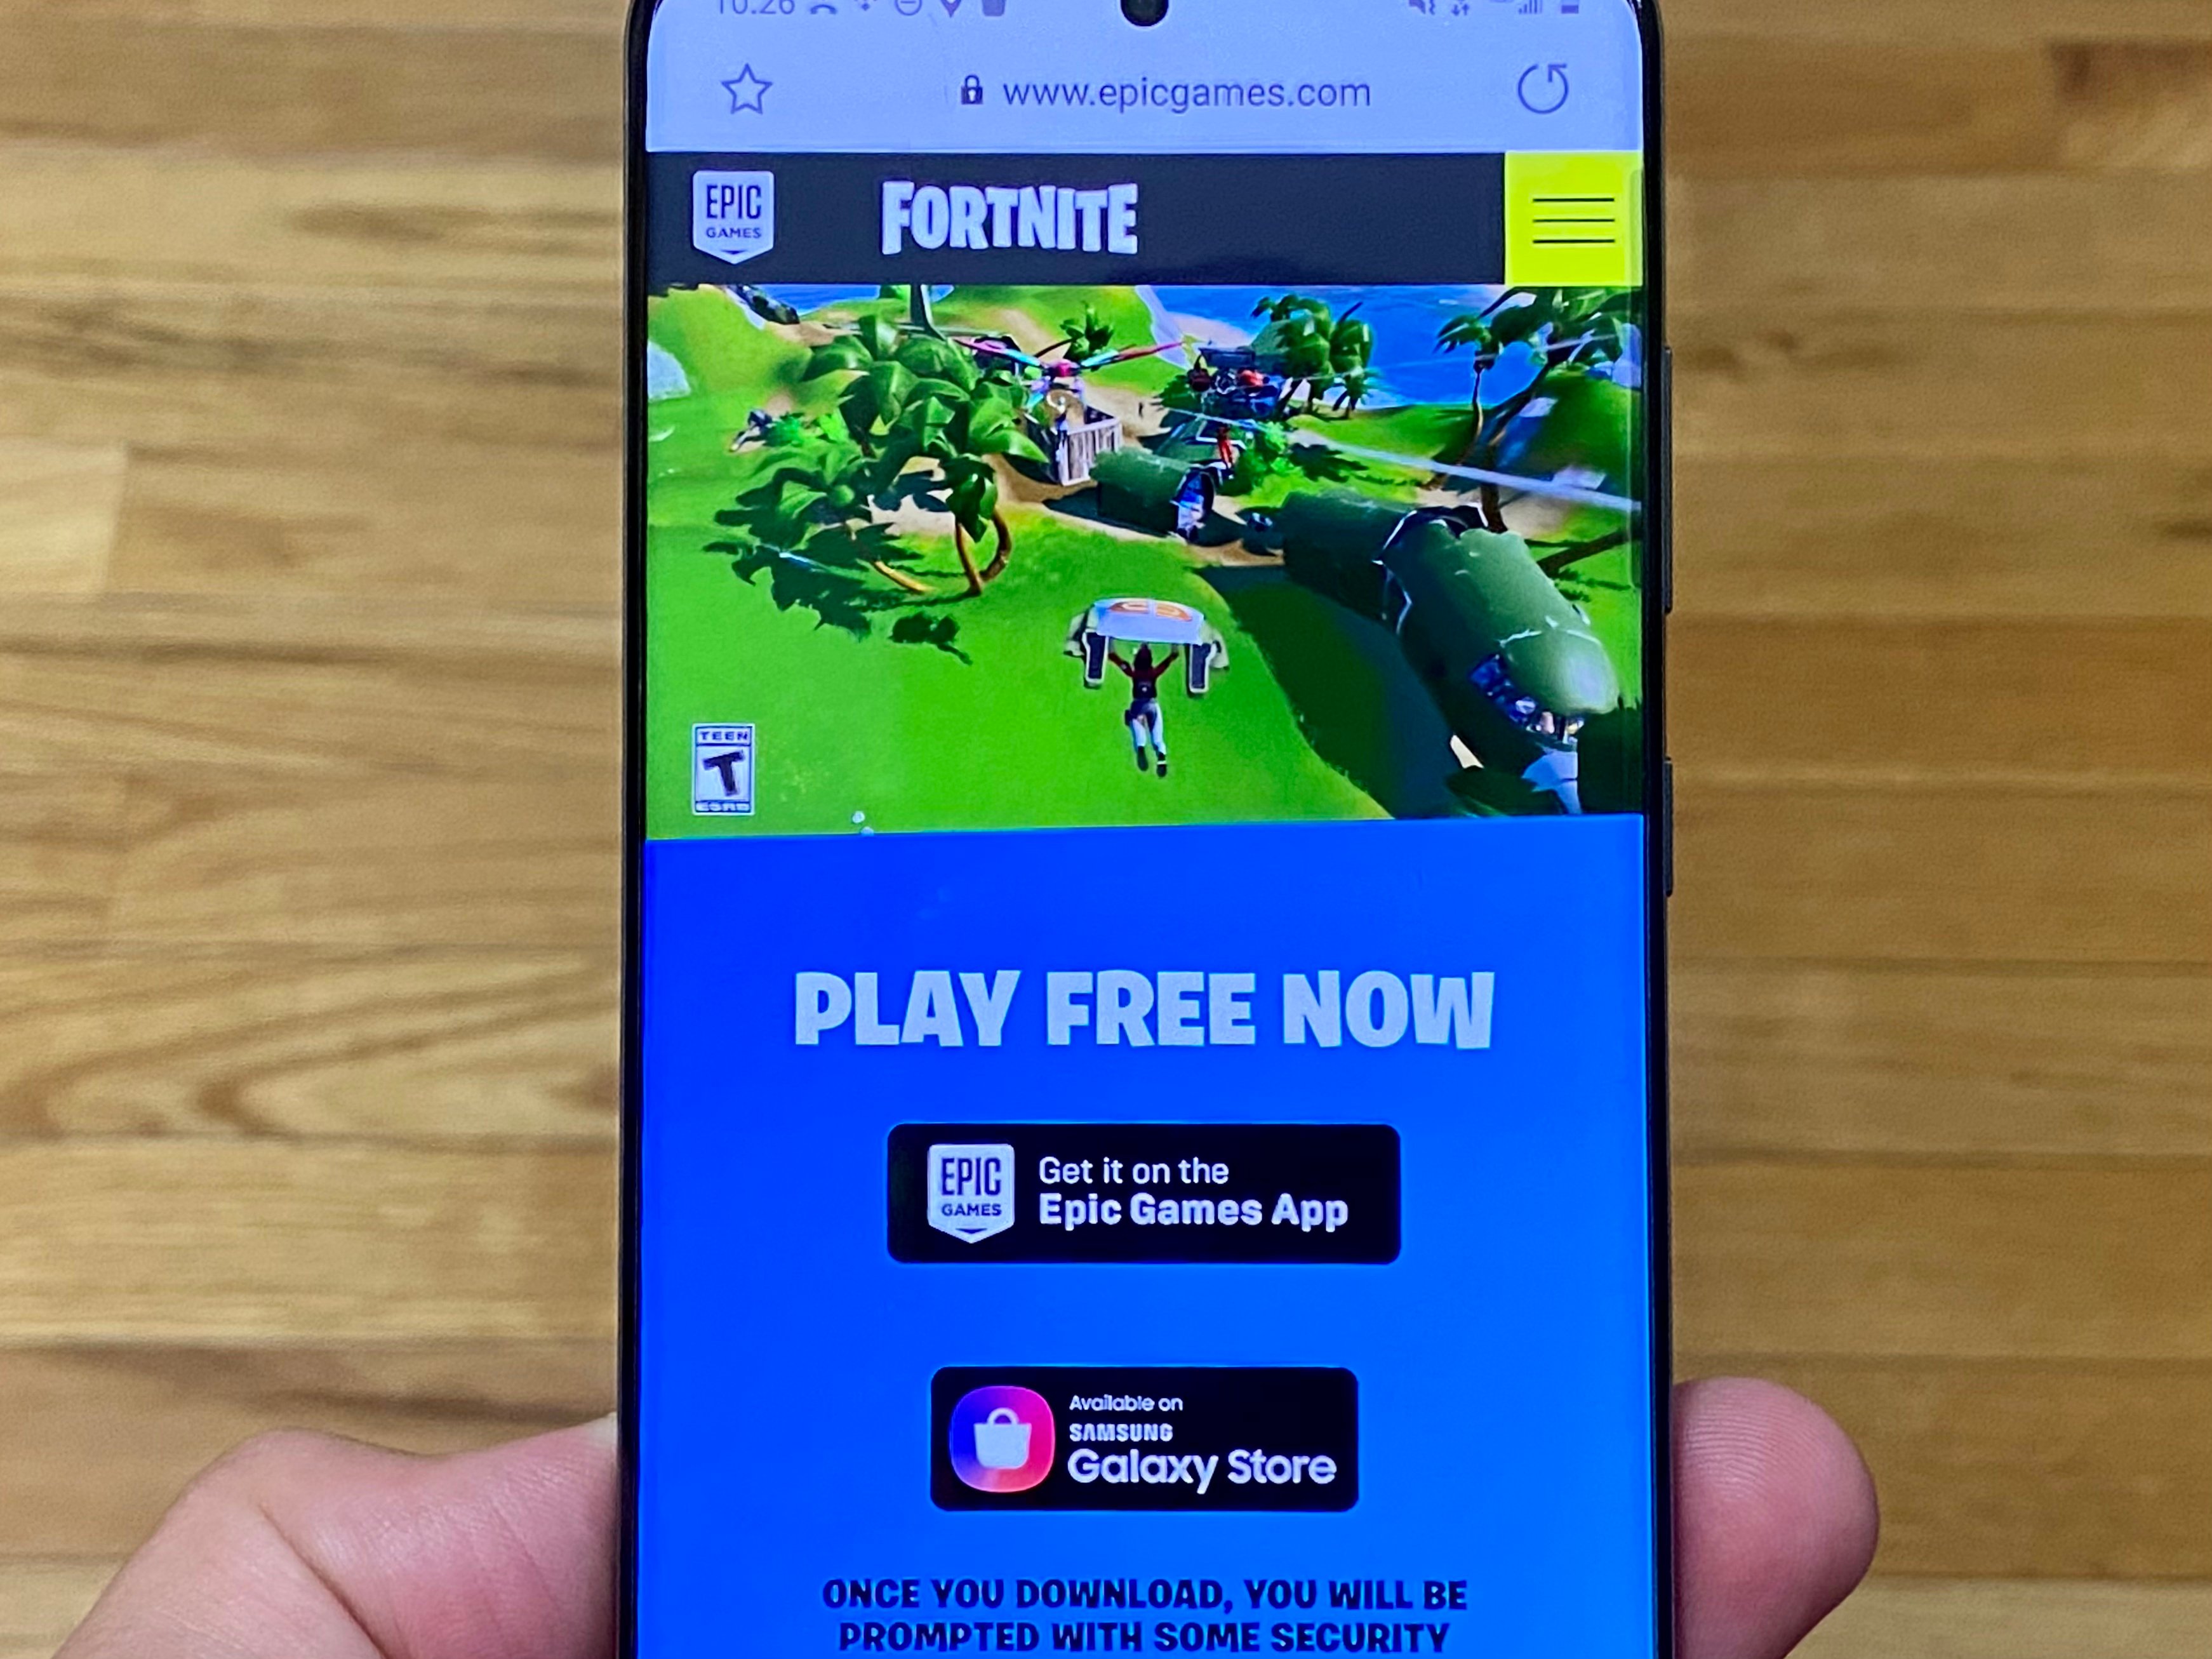 How to Install Fortnite on Android in 2020